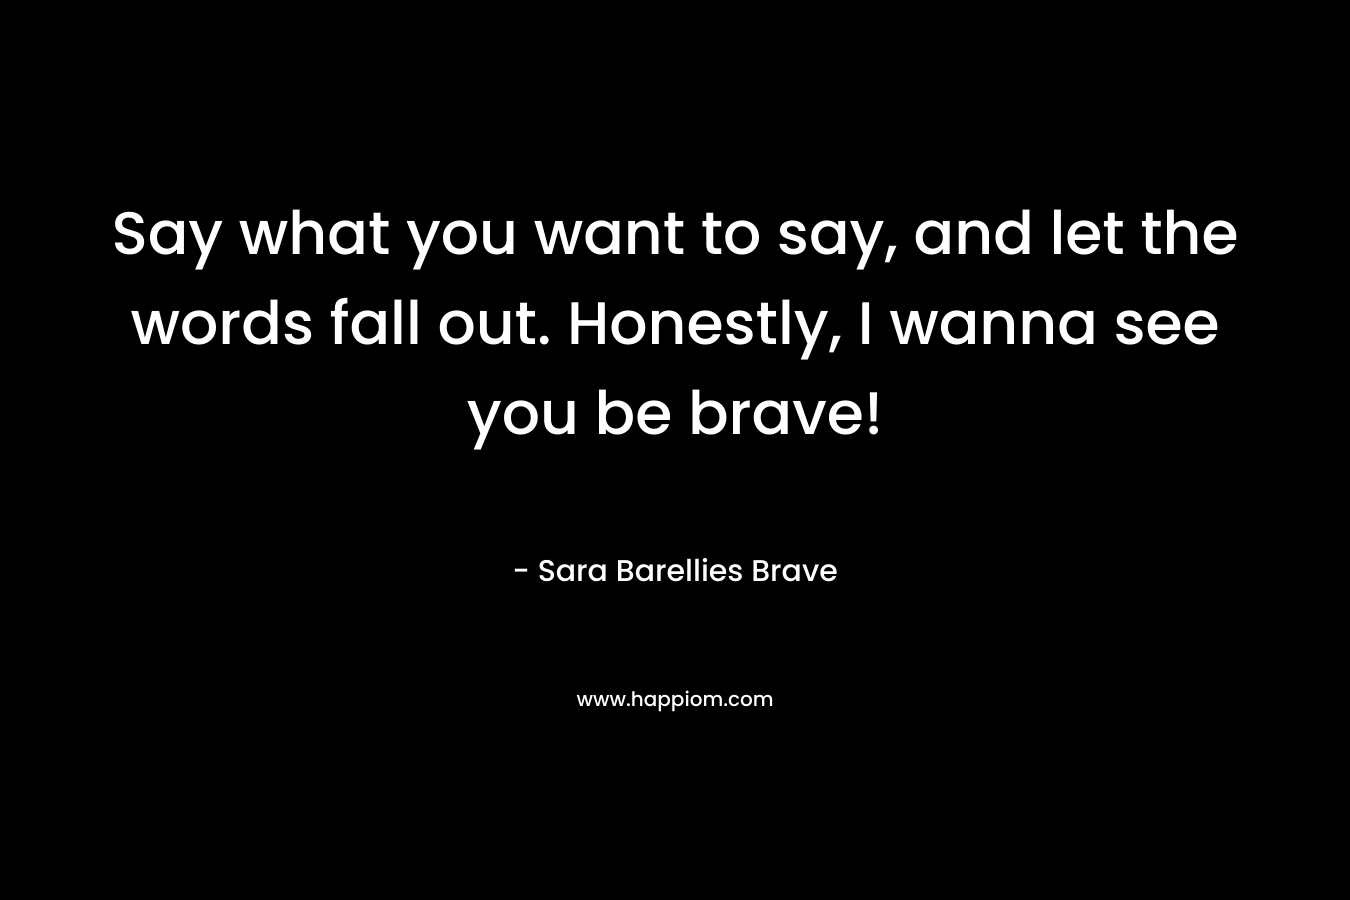 Say what you want to say, and let the words fall out. Honestly, I wanna see you be brave!